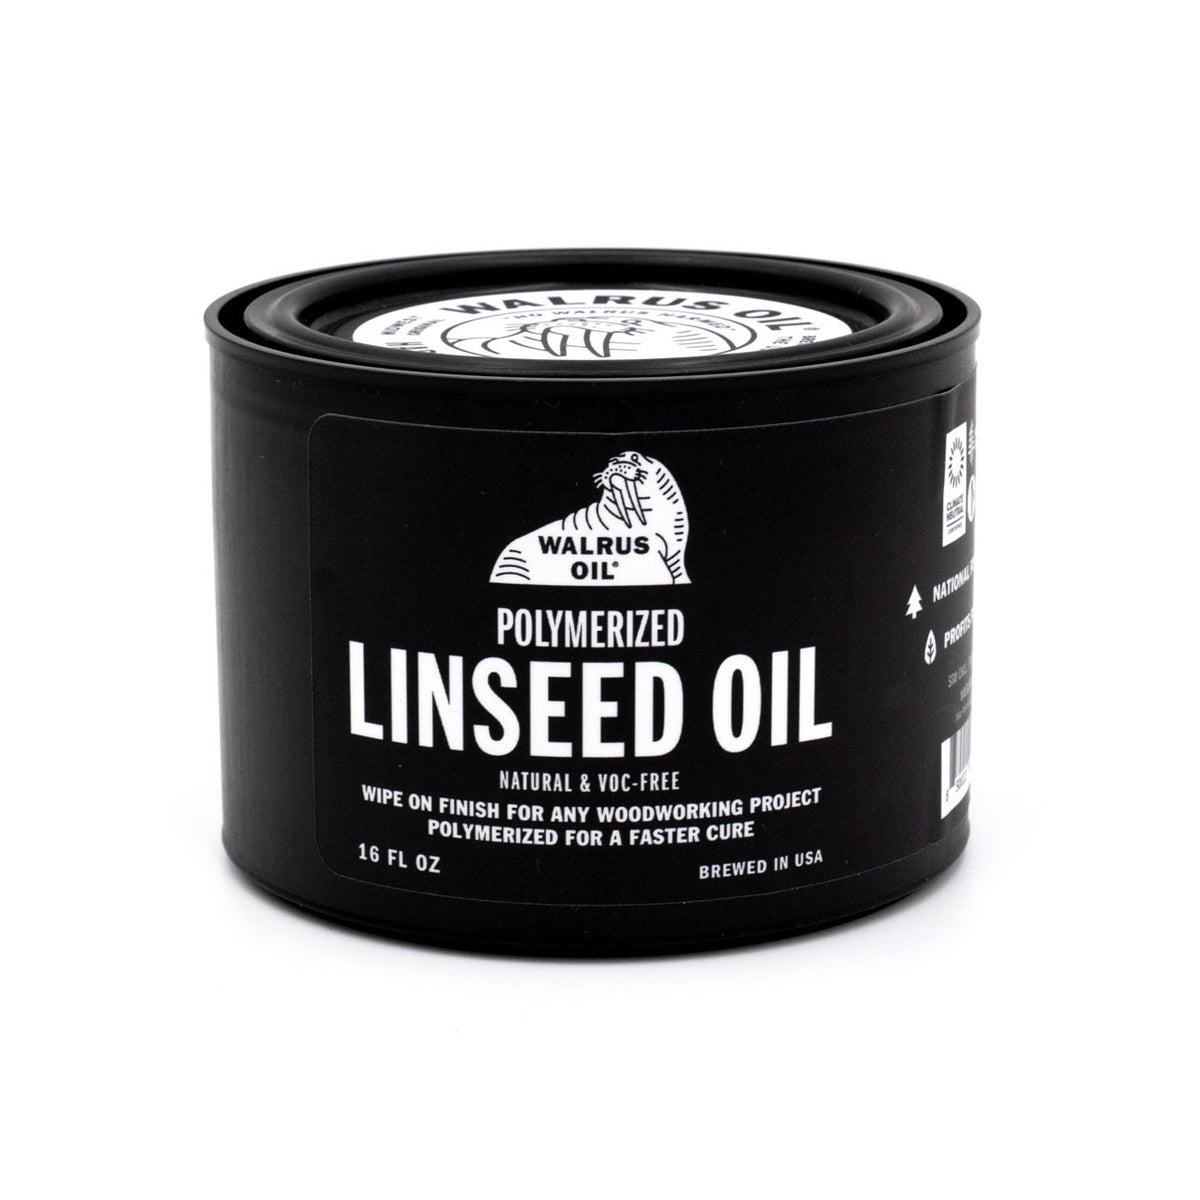 SPECIAL LINSEED OIL